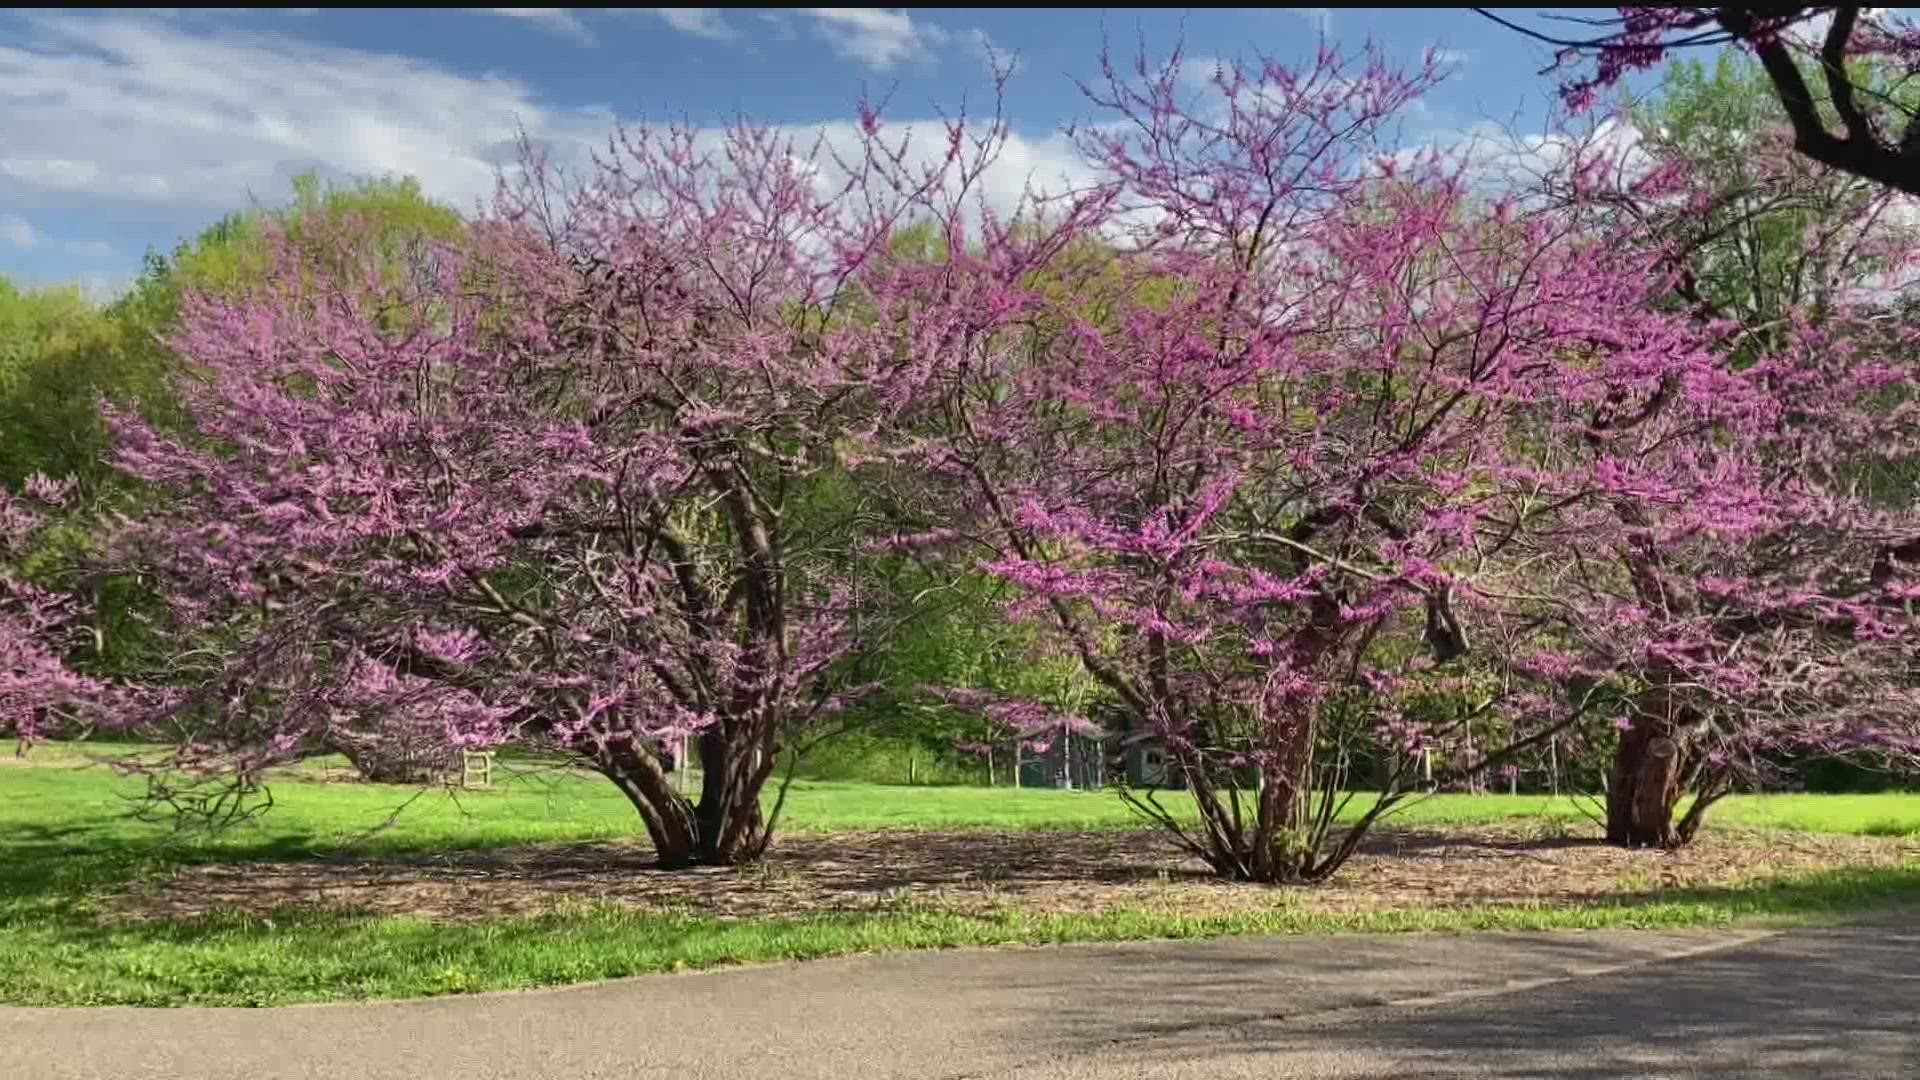 Thirty years ago, the University of Minnesota discovered a hardy strain of redbud and it's been our favorite ever since.